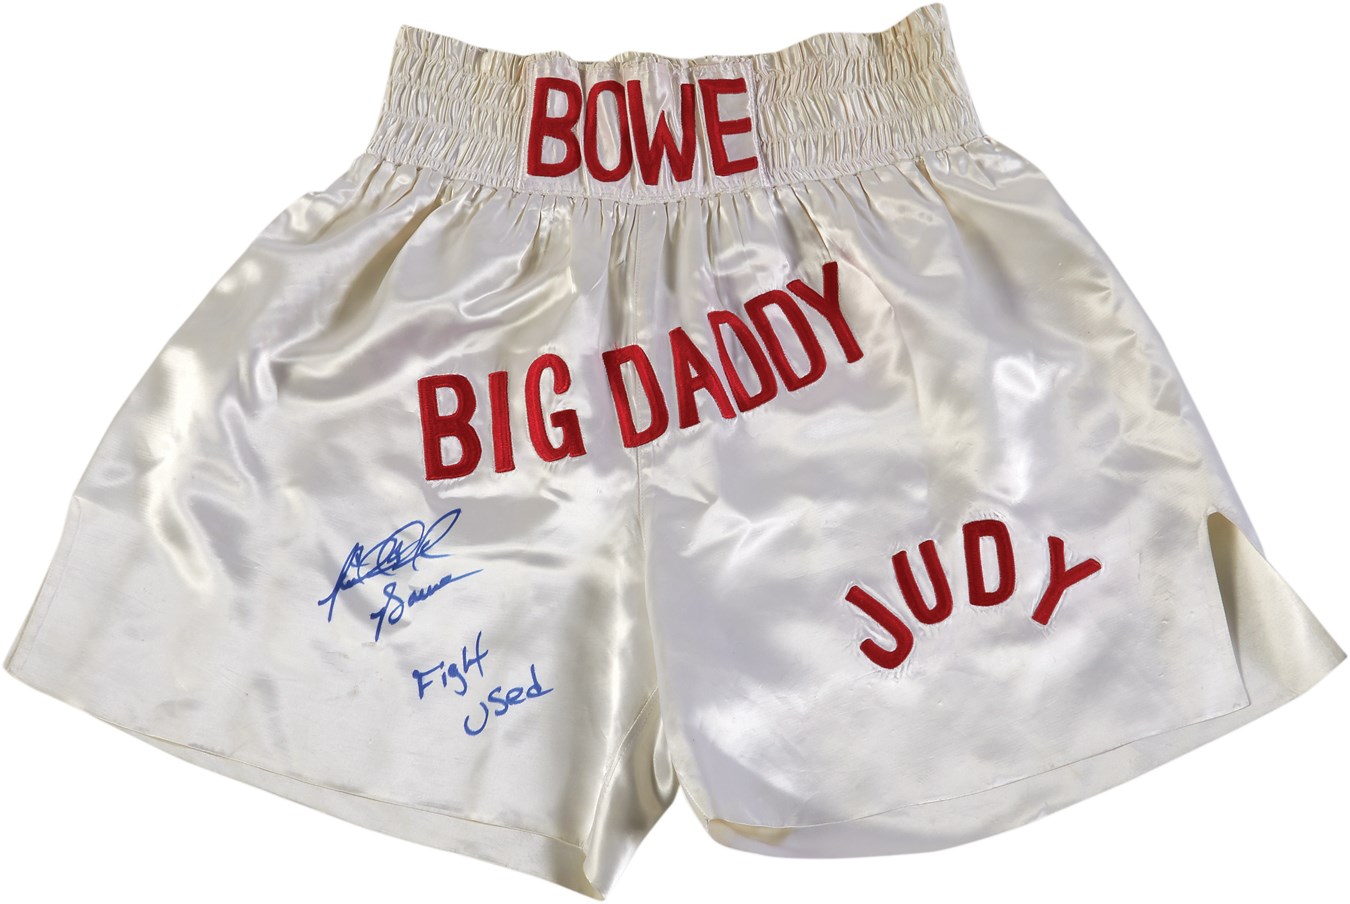 - 1996 Riddick Bowe Fight Worn Trunks from Andrew Golota I Match (Photomatched)